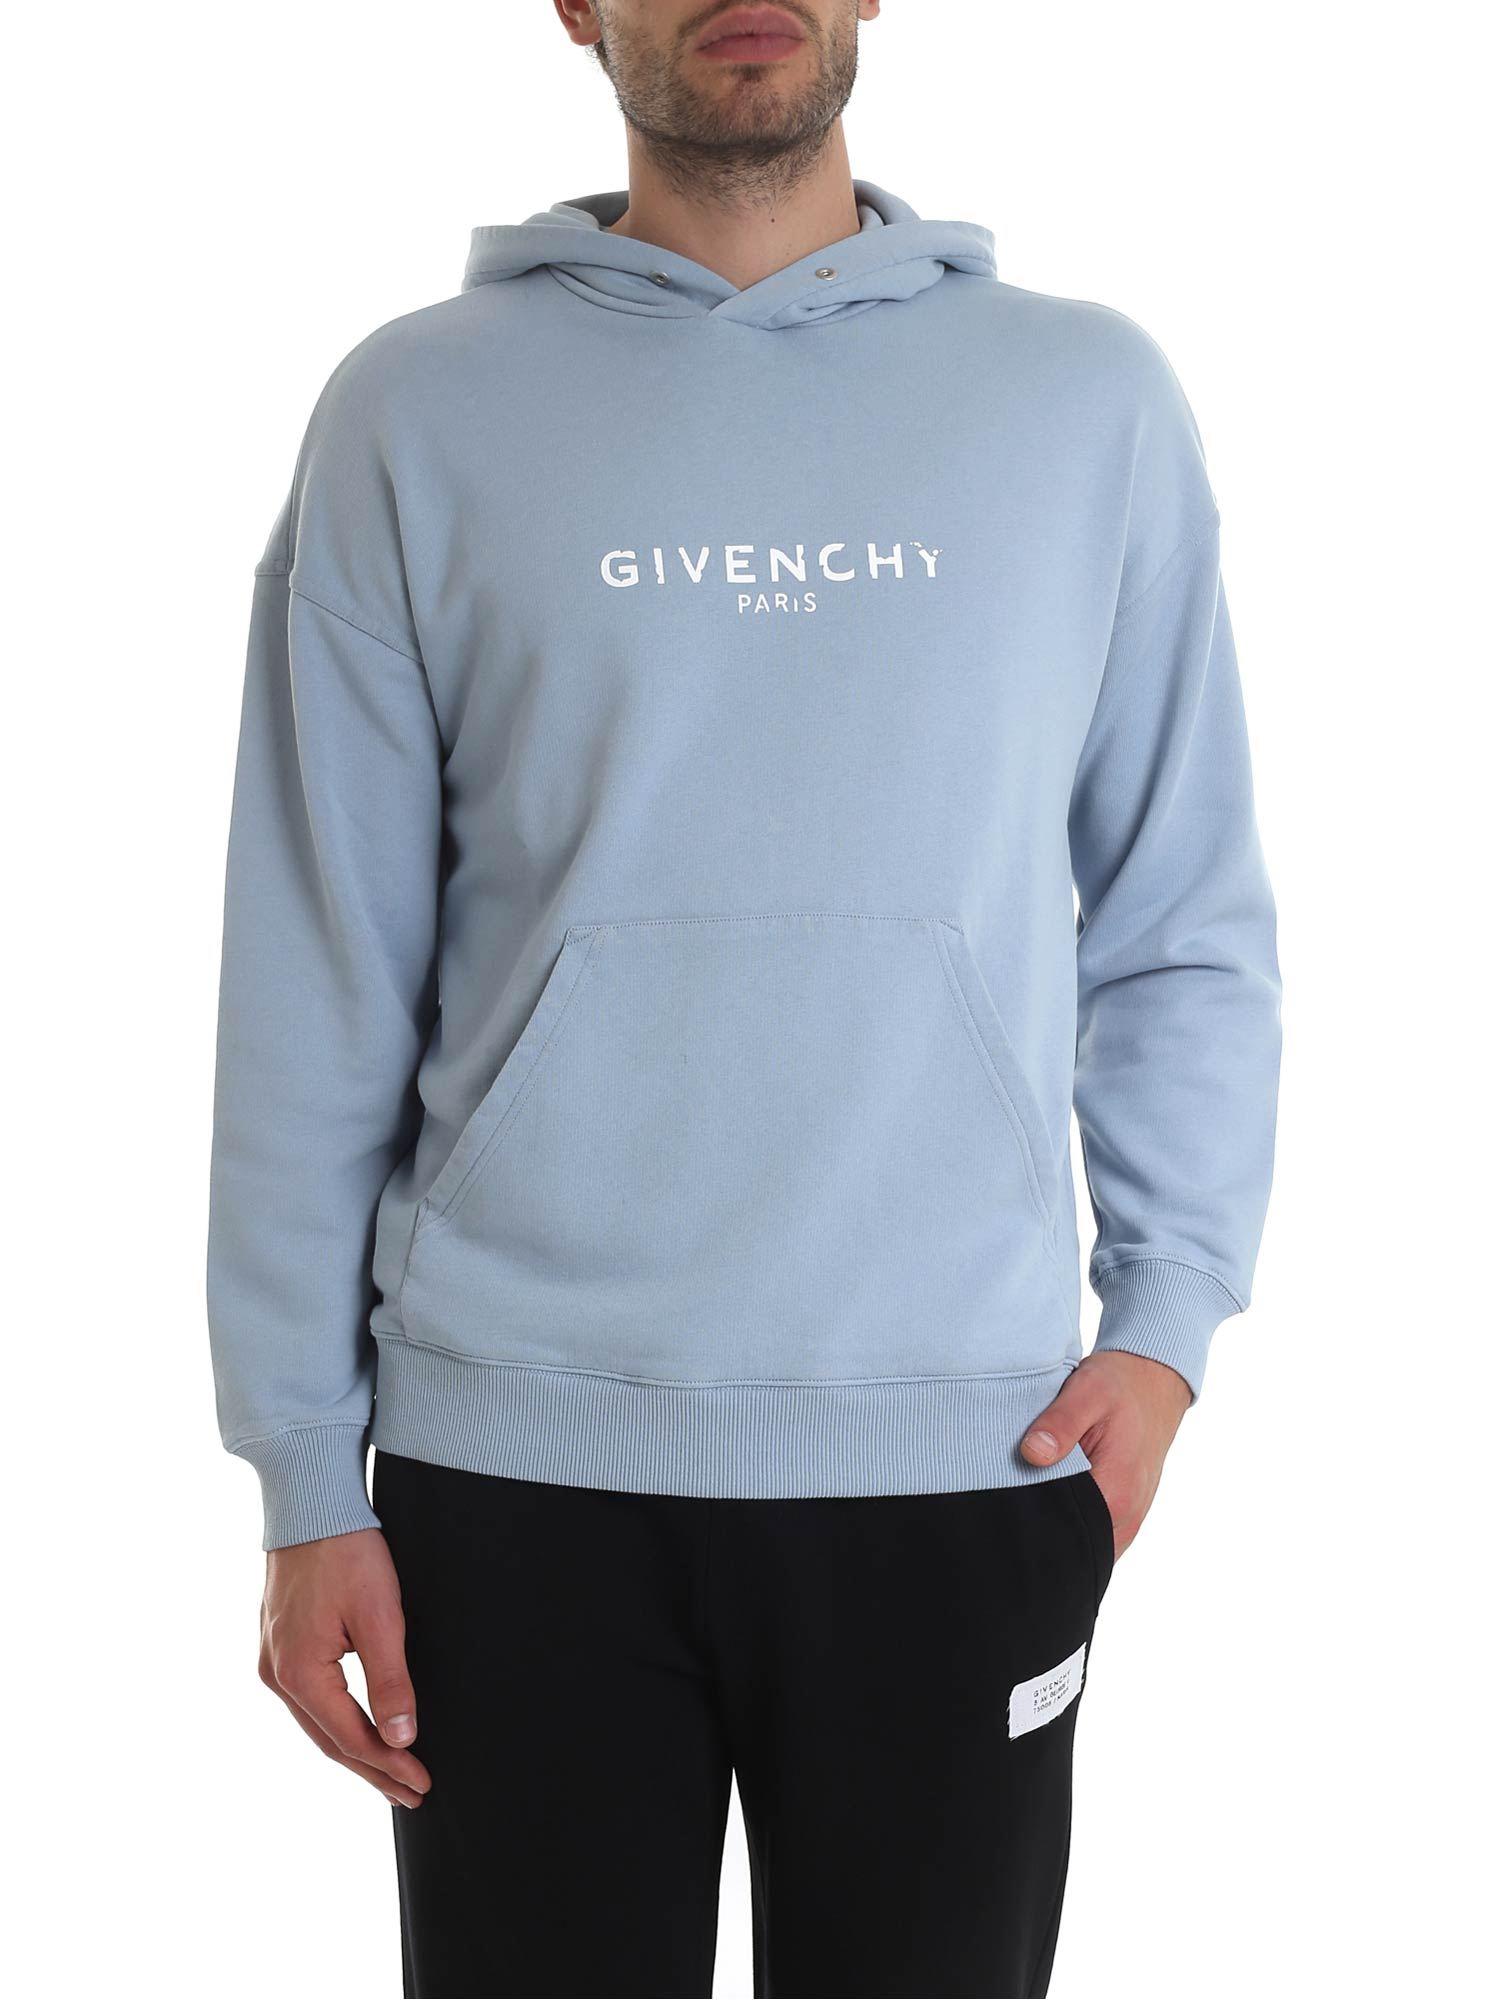 Givenchy Cotton Vintage Effect Paris Printed Hoodie in Blue for Men - Lyst